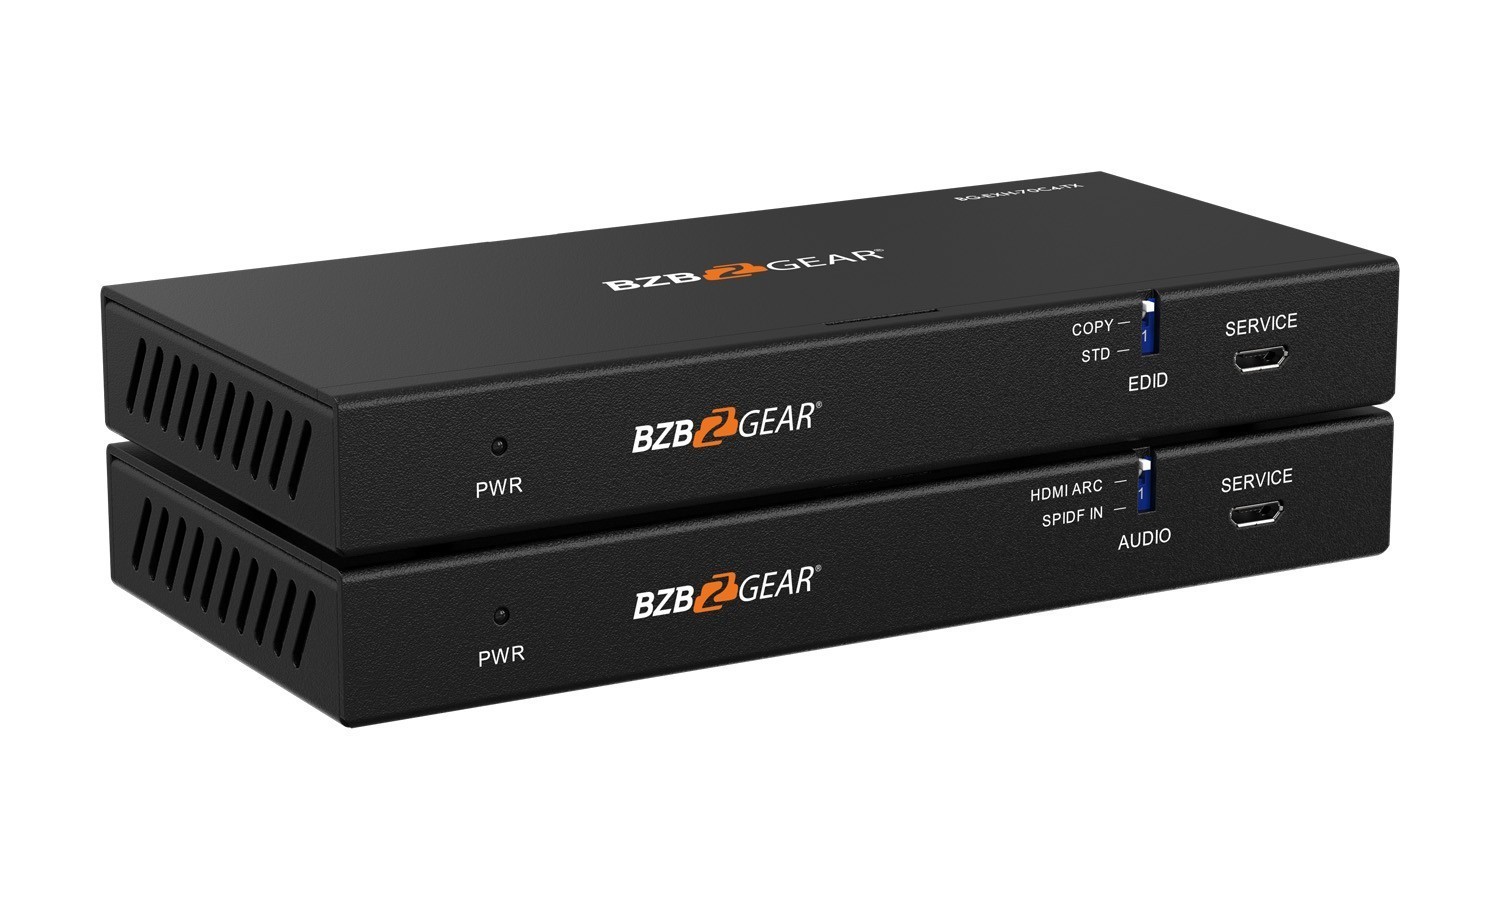 BG-EXH-70C4 4K UHD HDMI HDBaseT Extender with IR/ARC/PoC/RS-232 and Audio Embedding/De-embedding up to 230ft by BZBGEAR